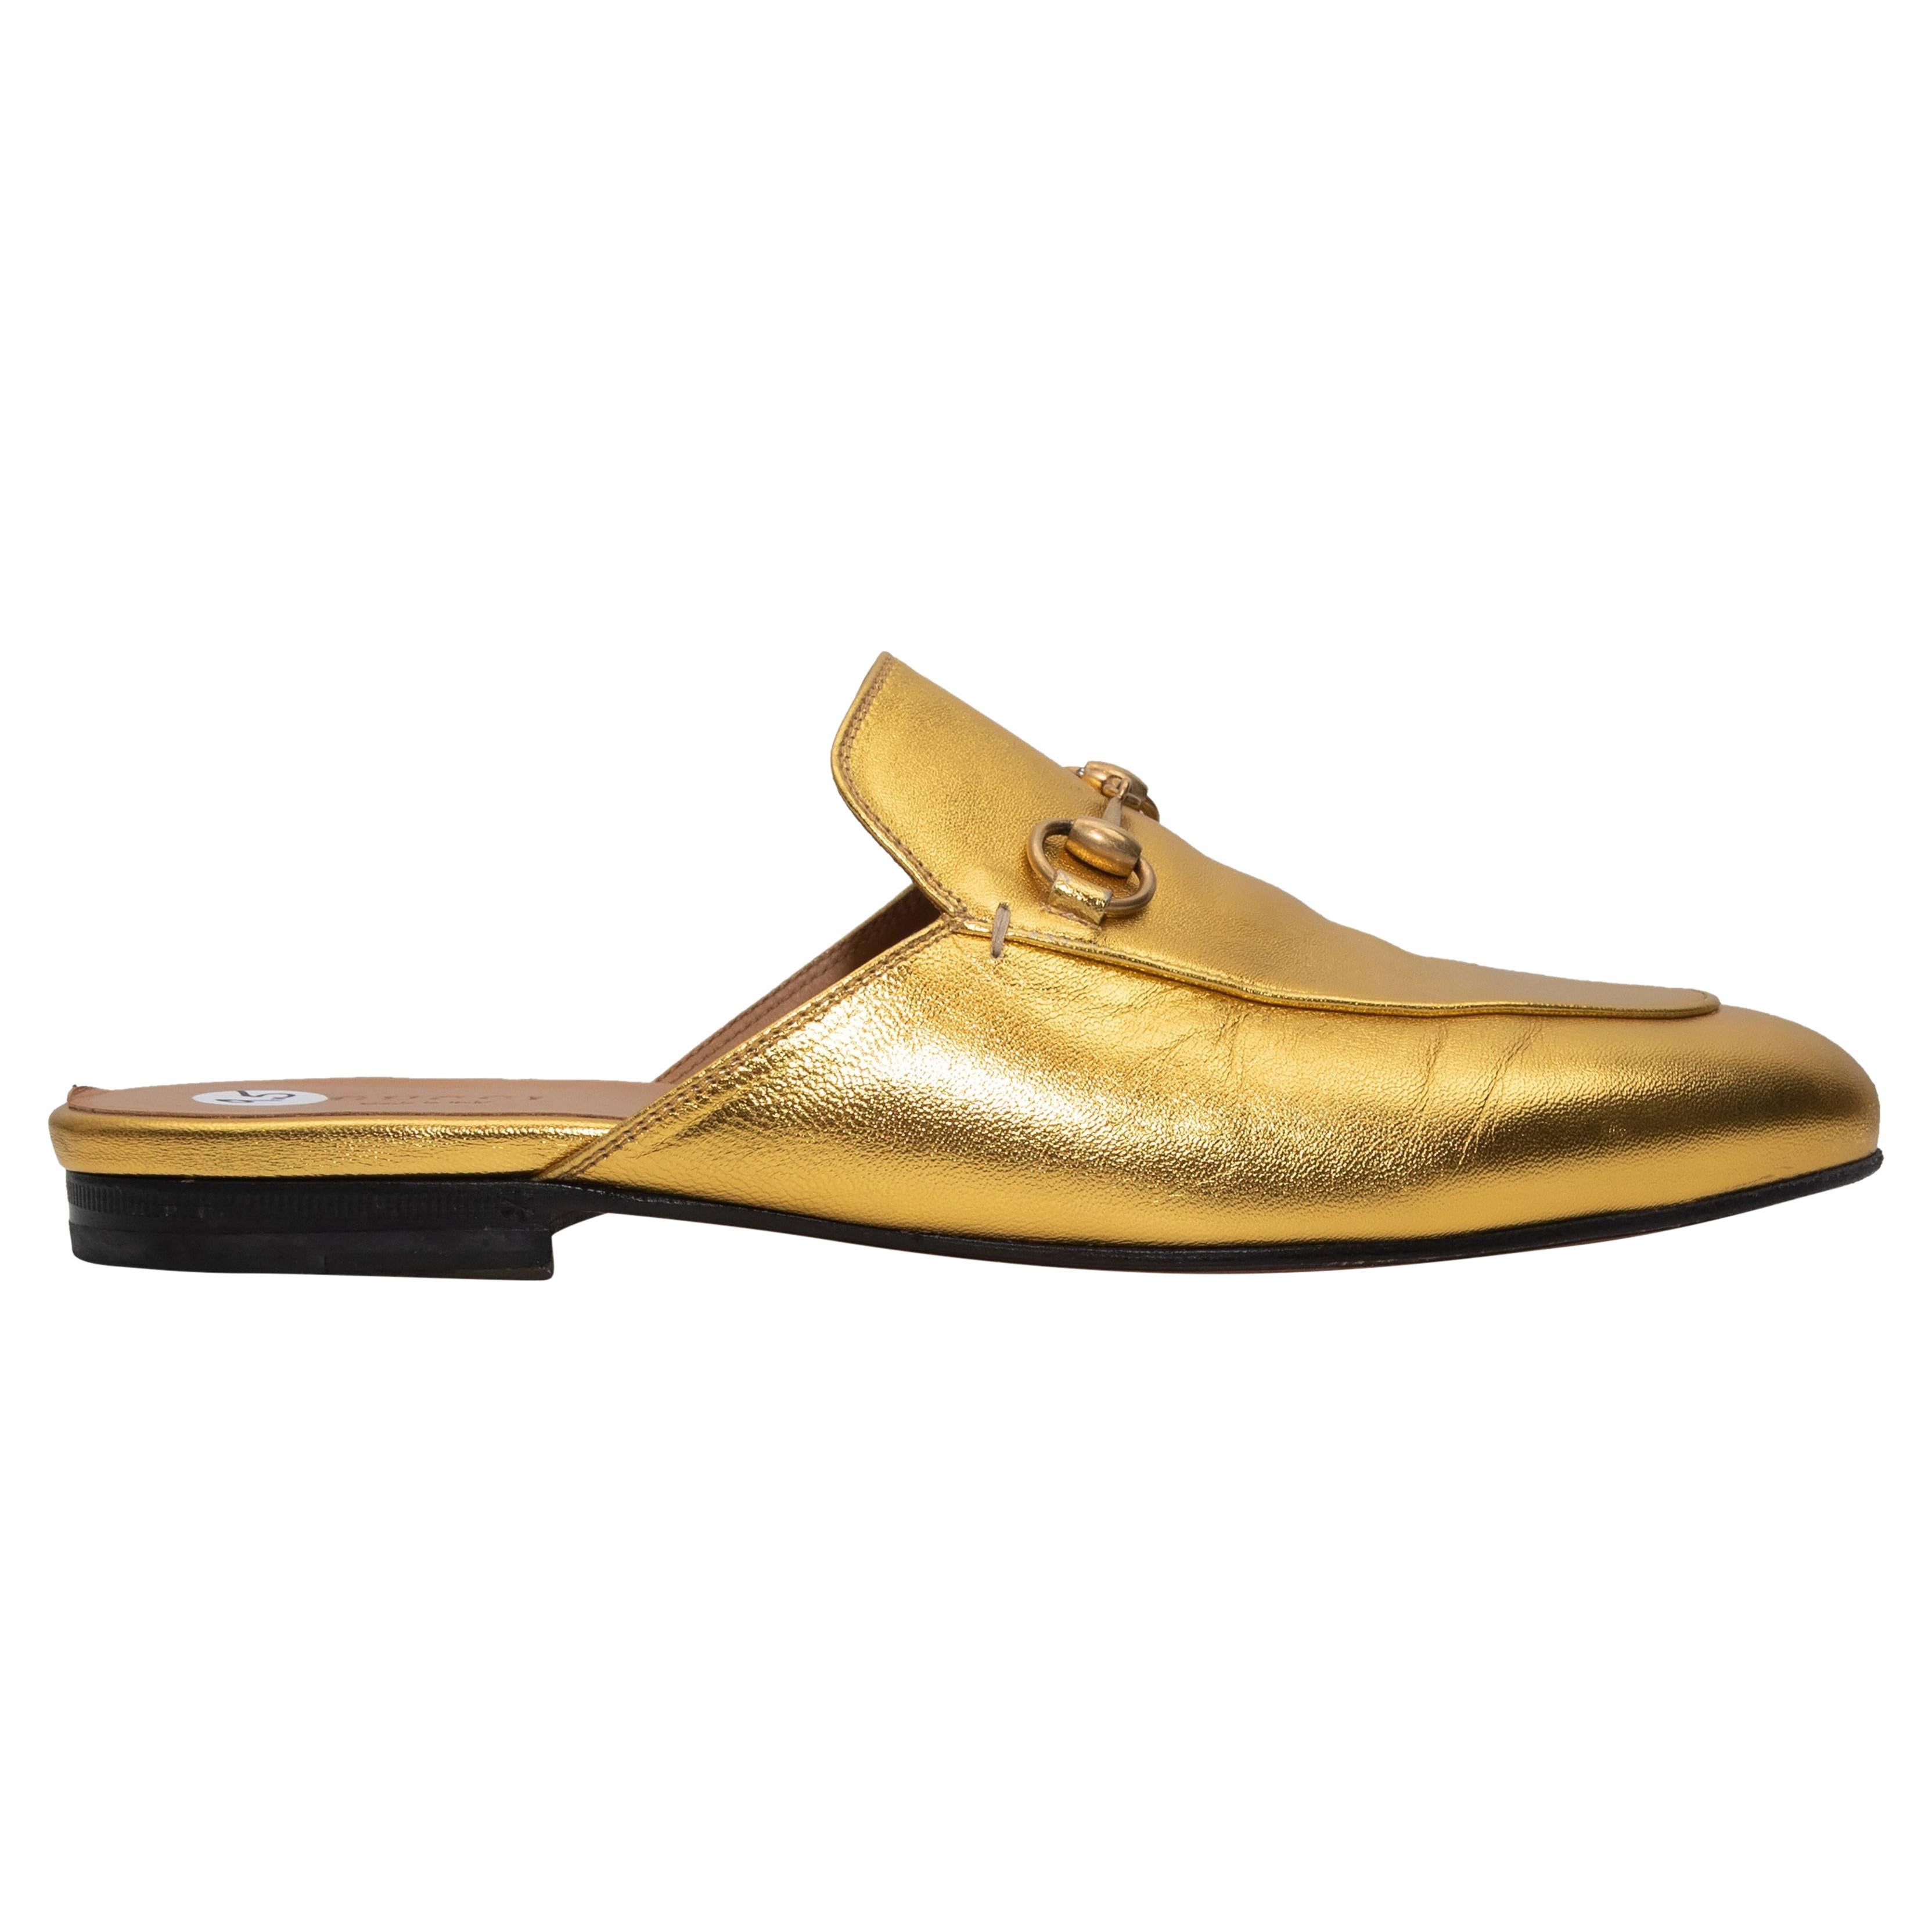 Gucci Gold Princetown Metallic Loafer Mules